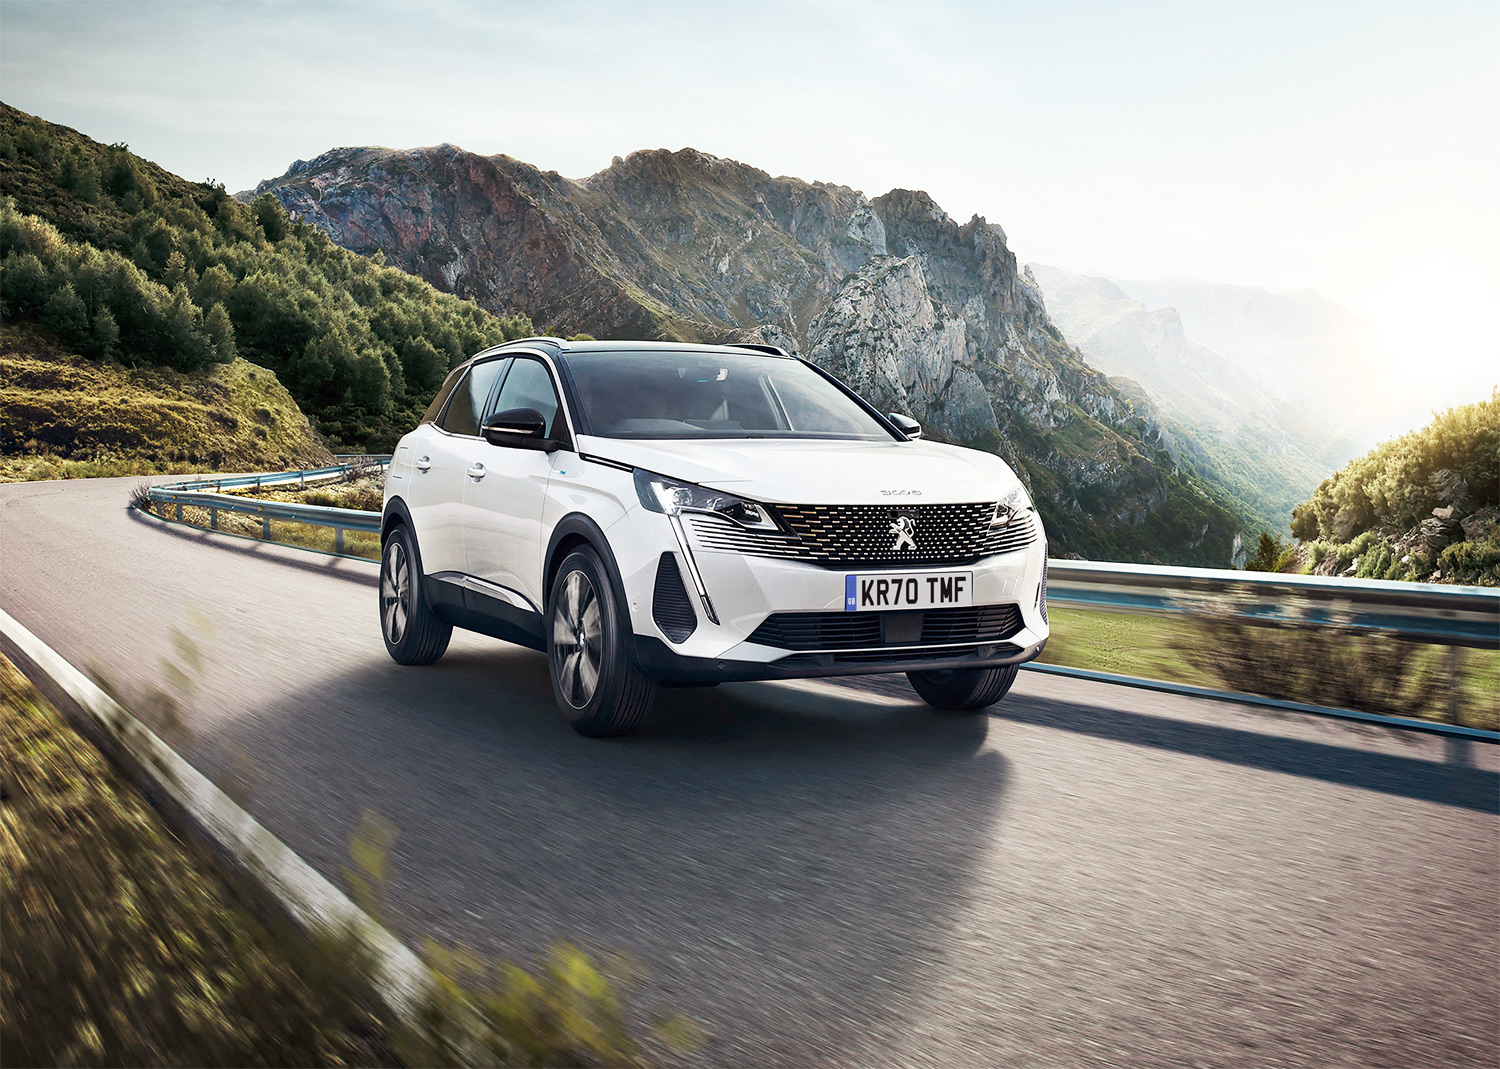 The Peugeot 3008 Hybrid SUV Is Stylish, Smart And Immensely Practical